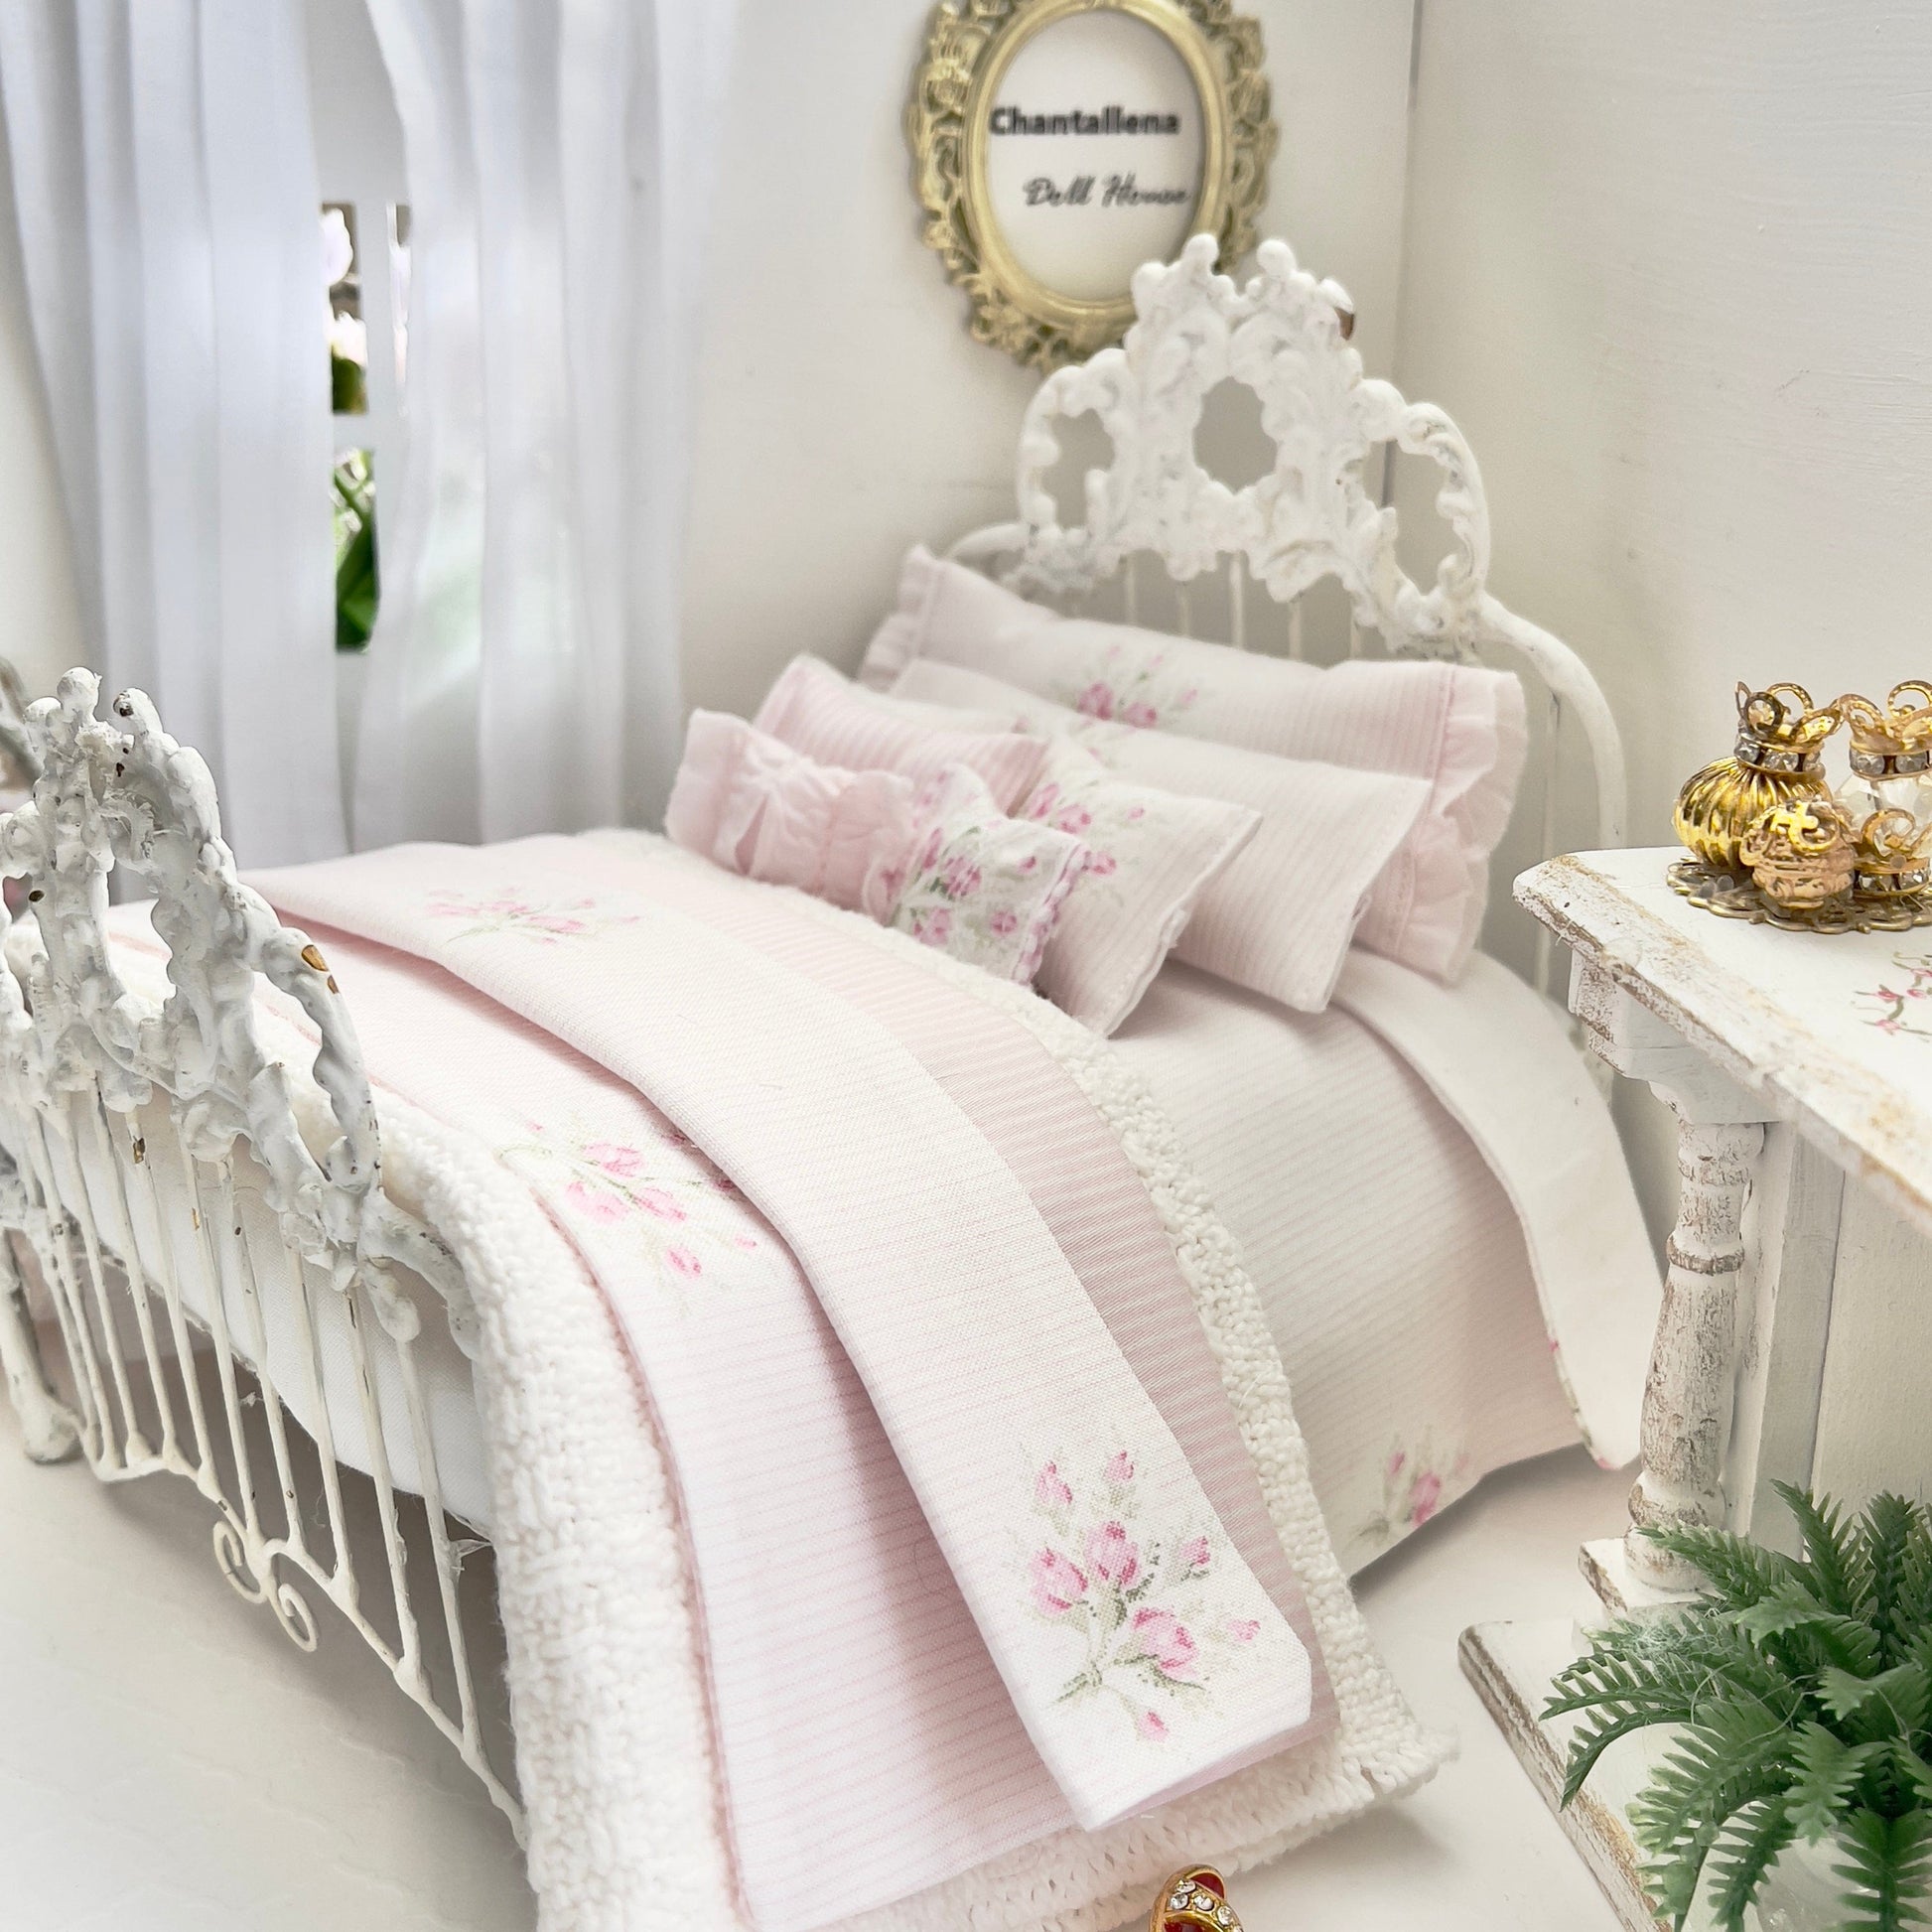 Chantallena Doll House SINGLE Shabby Cottage | Eight Piece Blue and Pink Floral Bedding Set | Brooke